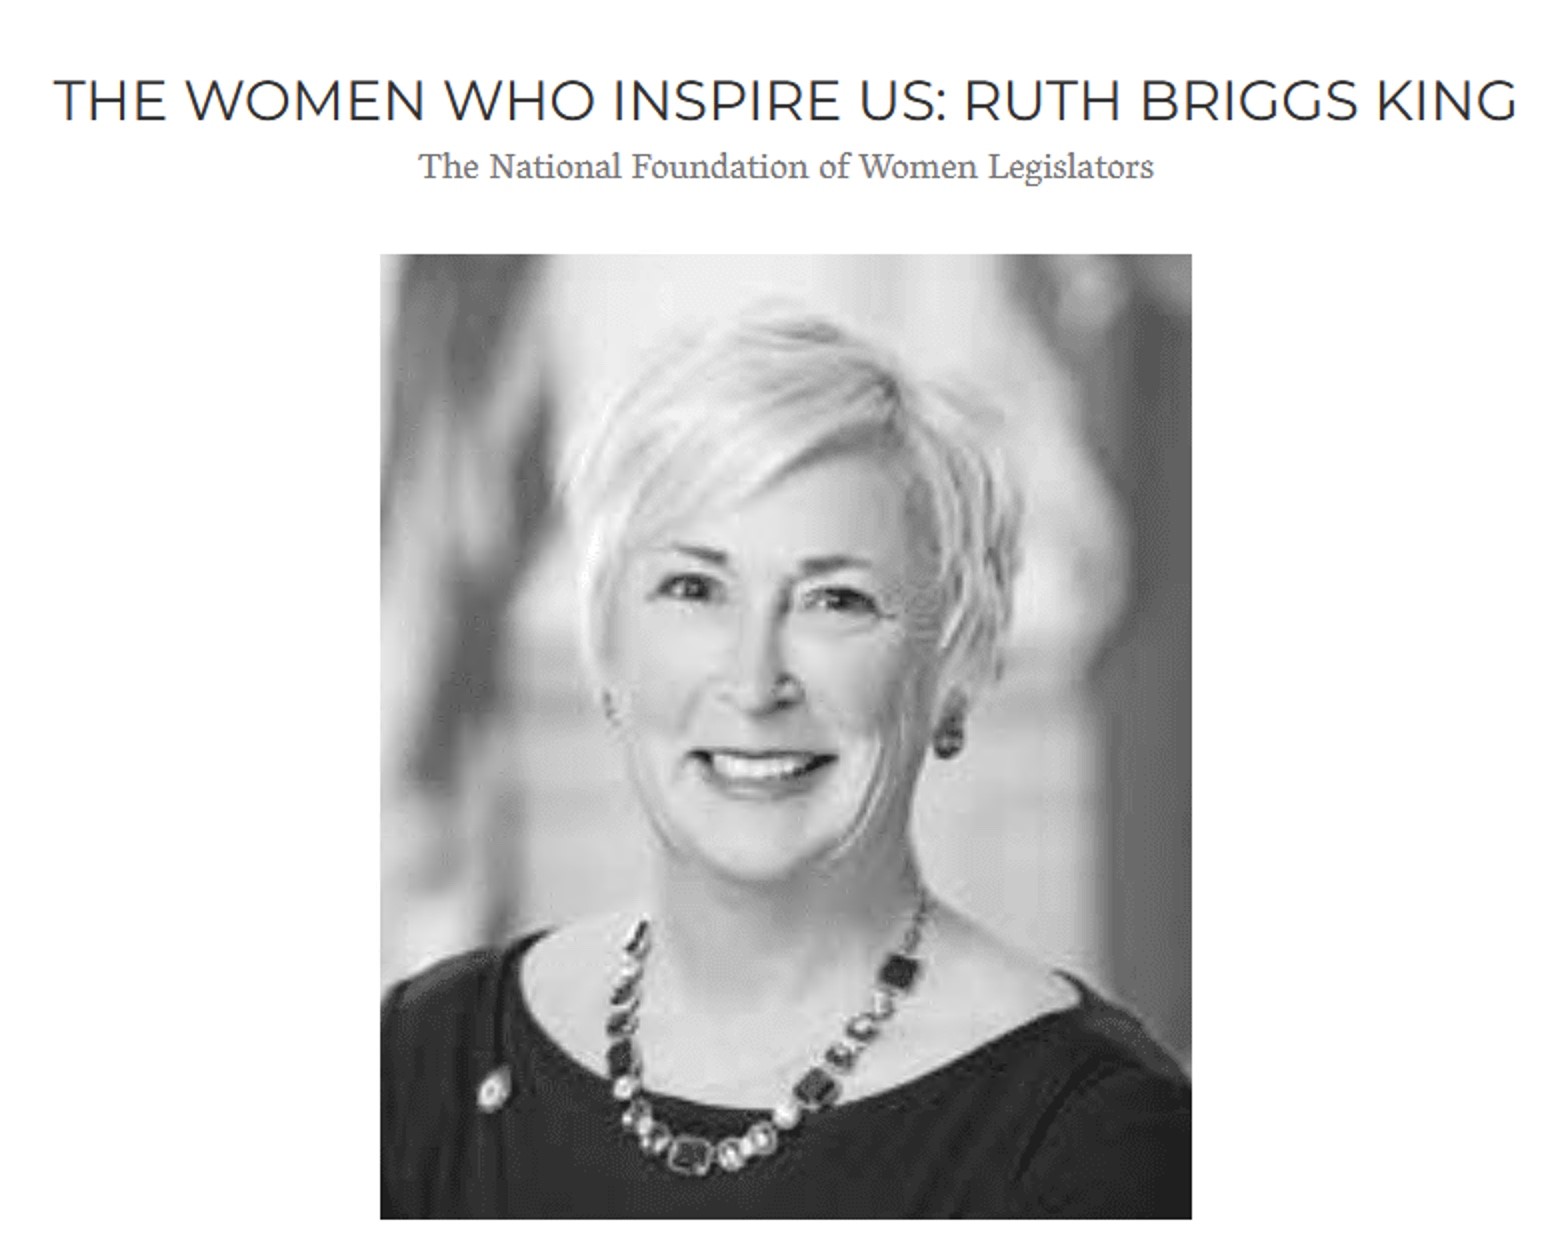 State Rep. Ruth Briggs King is featured in a national publication as among “The Women Who Inspire Us”